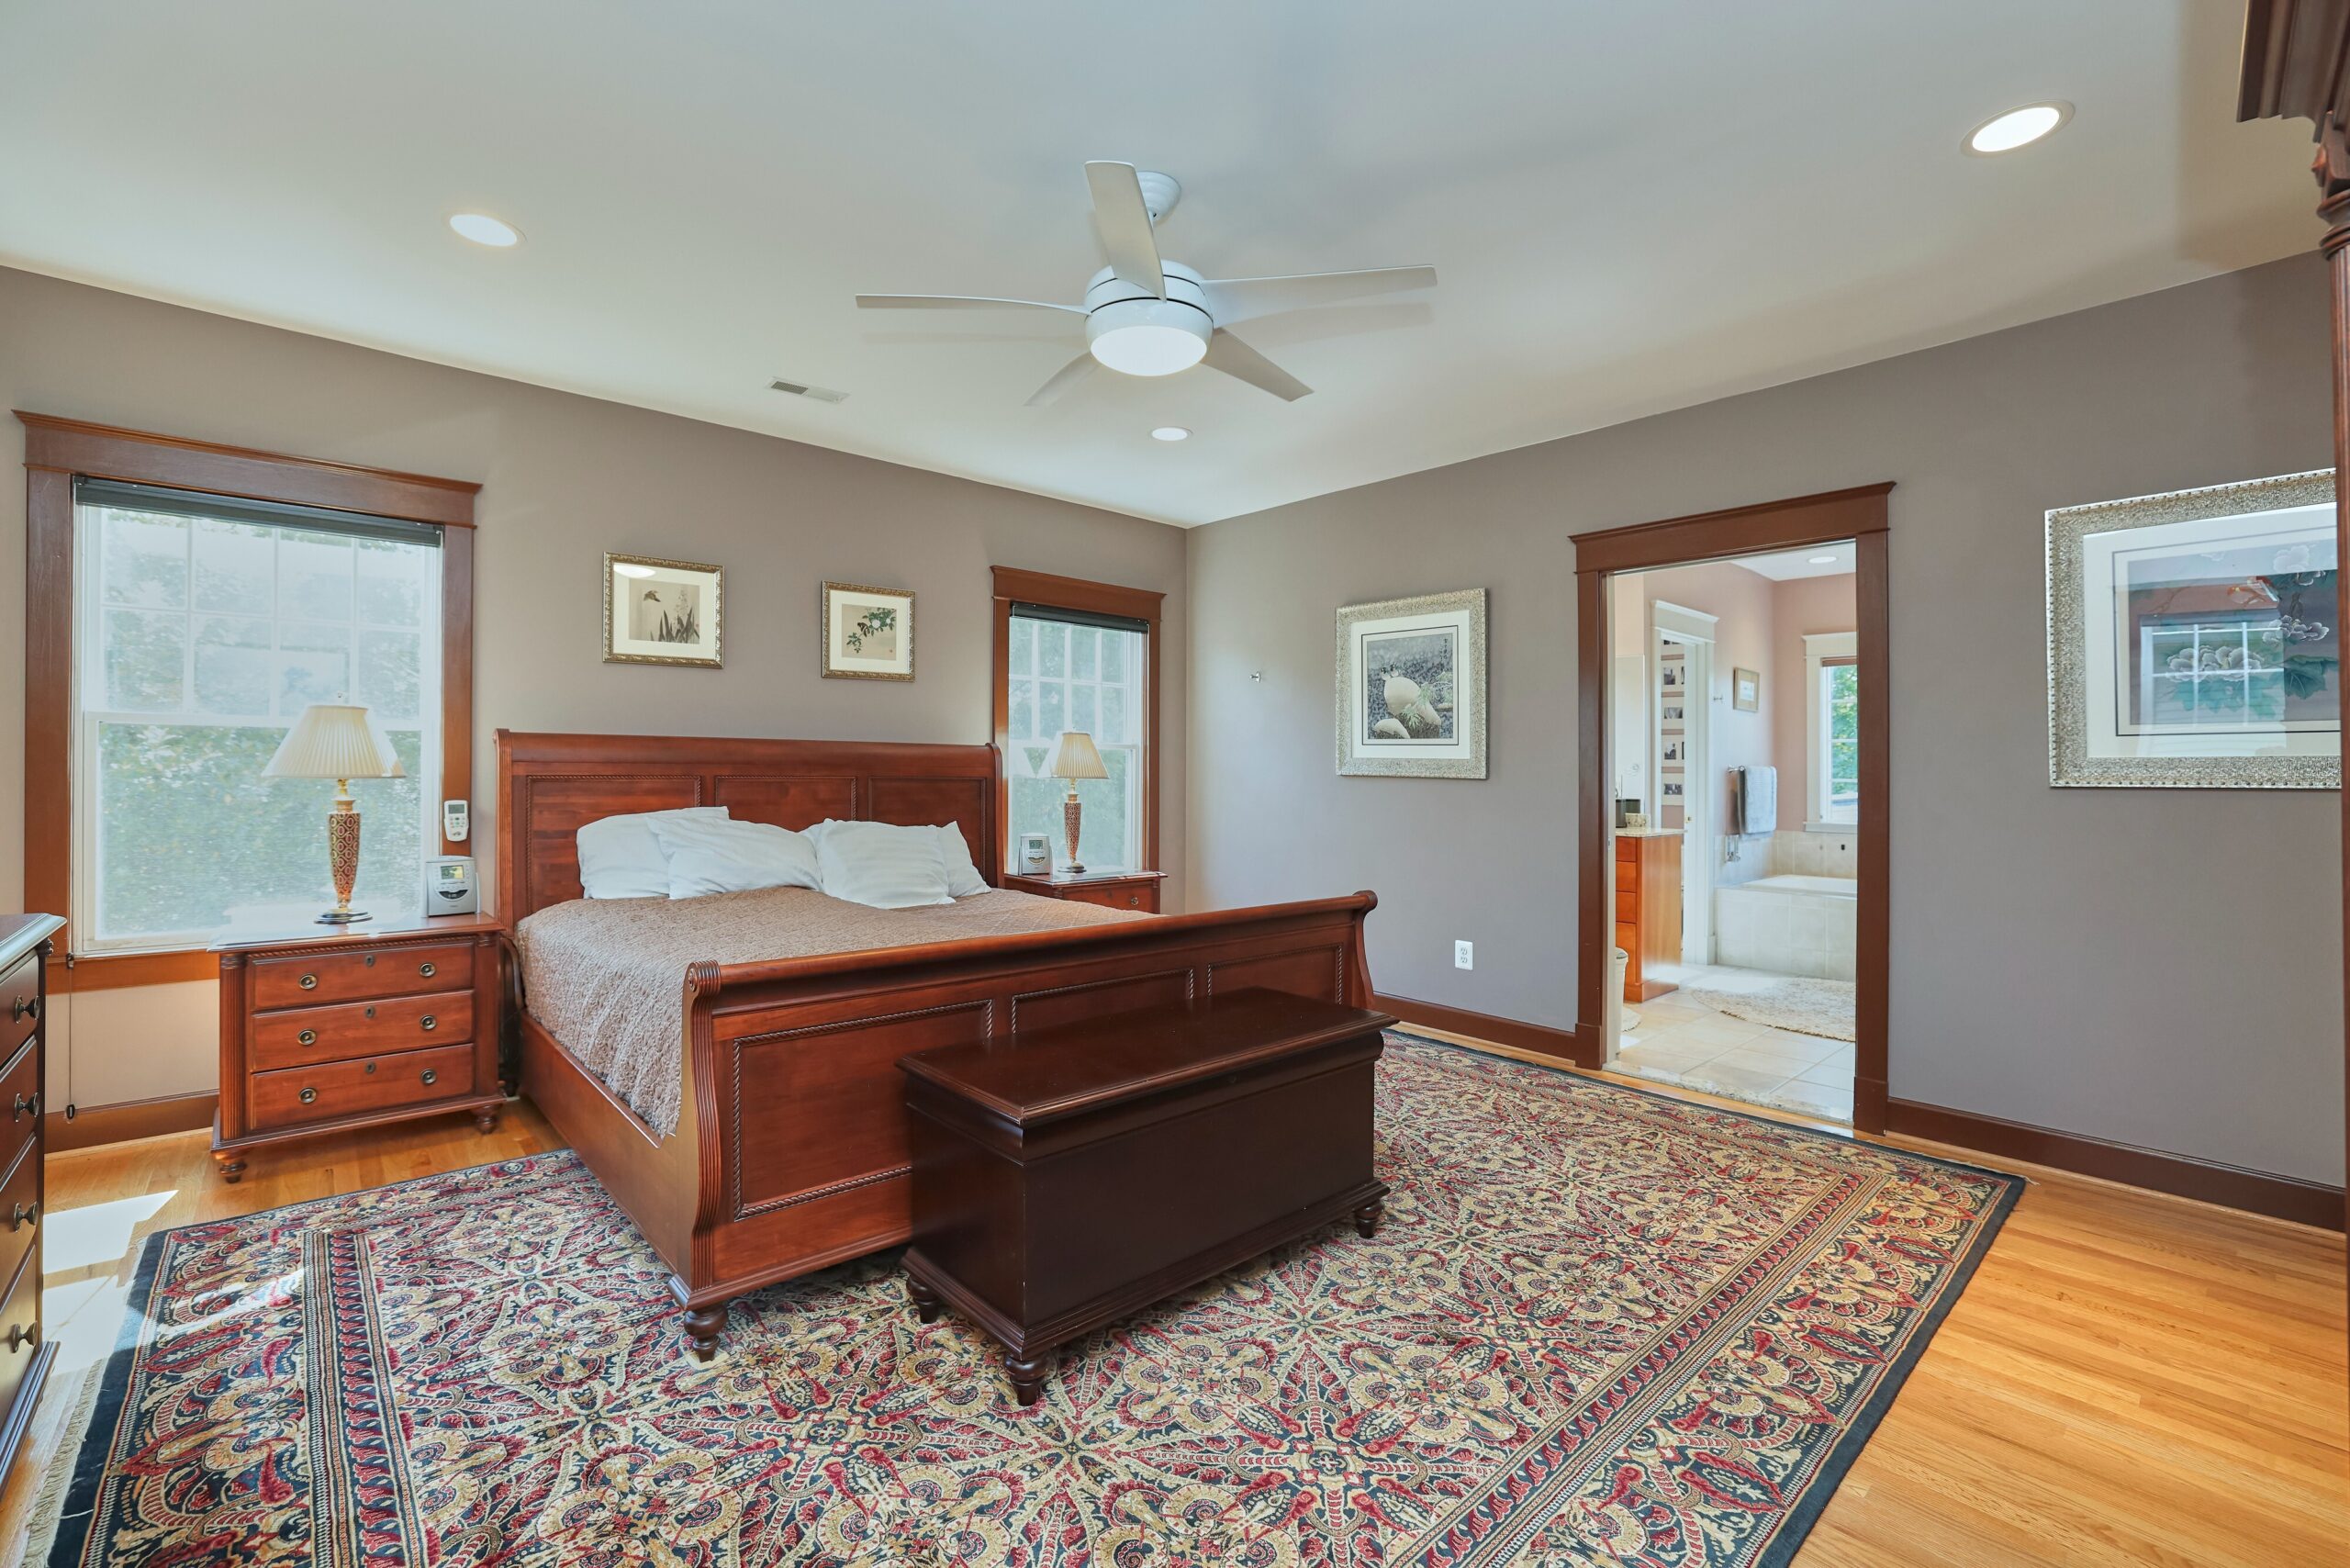 Professional interior photo of 819 N Fillmore St - Showing the primary bedroom with grey walls, ceiling fan, large windows, and view into bathroom